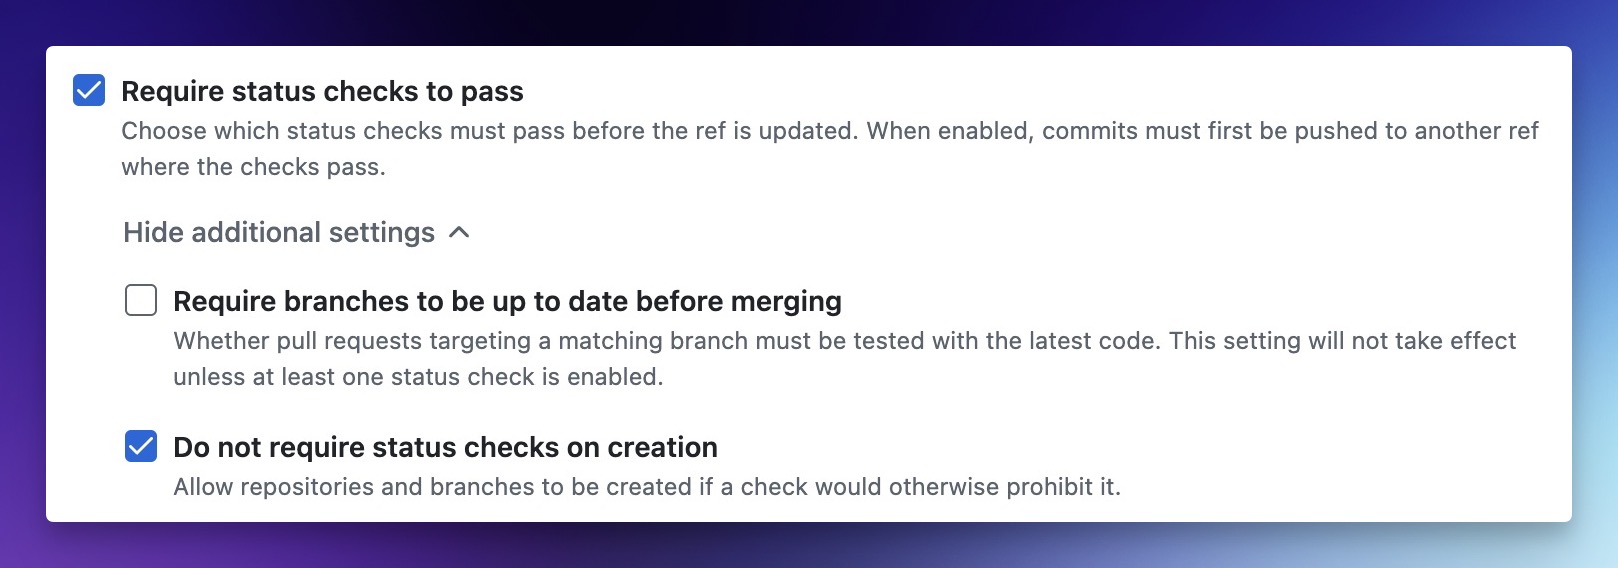 Screenshot of require status check rule with the new "Do not require status checks on creation" option enabled